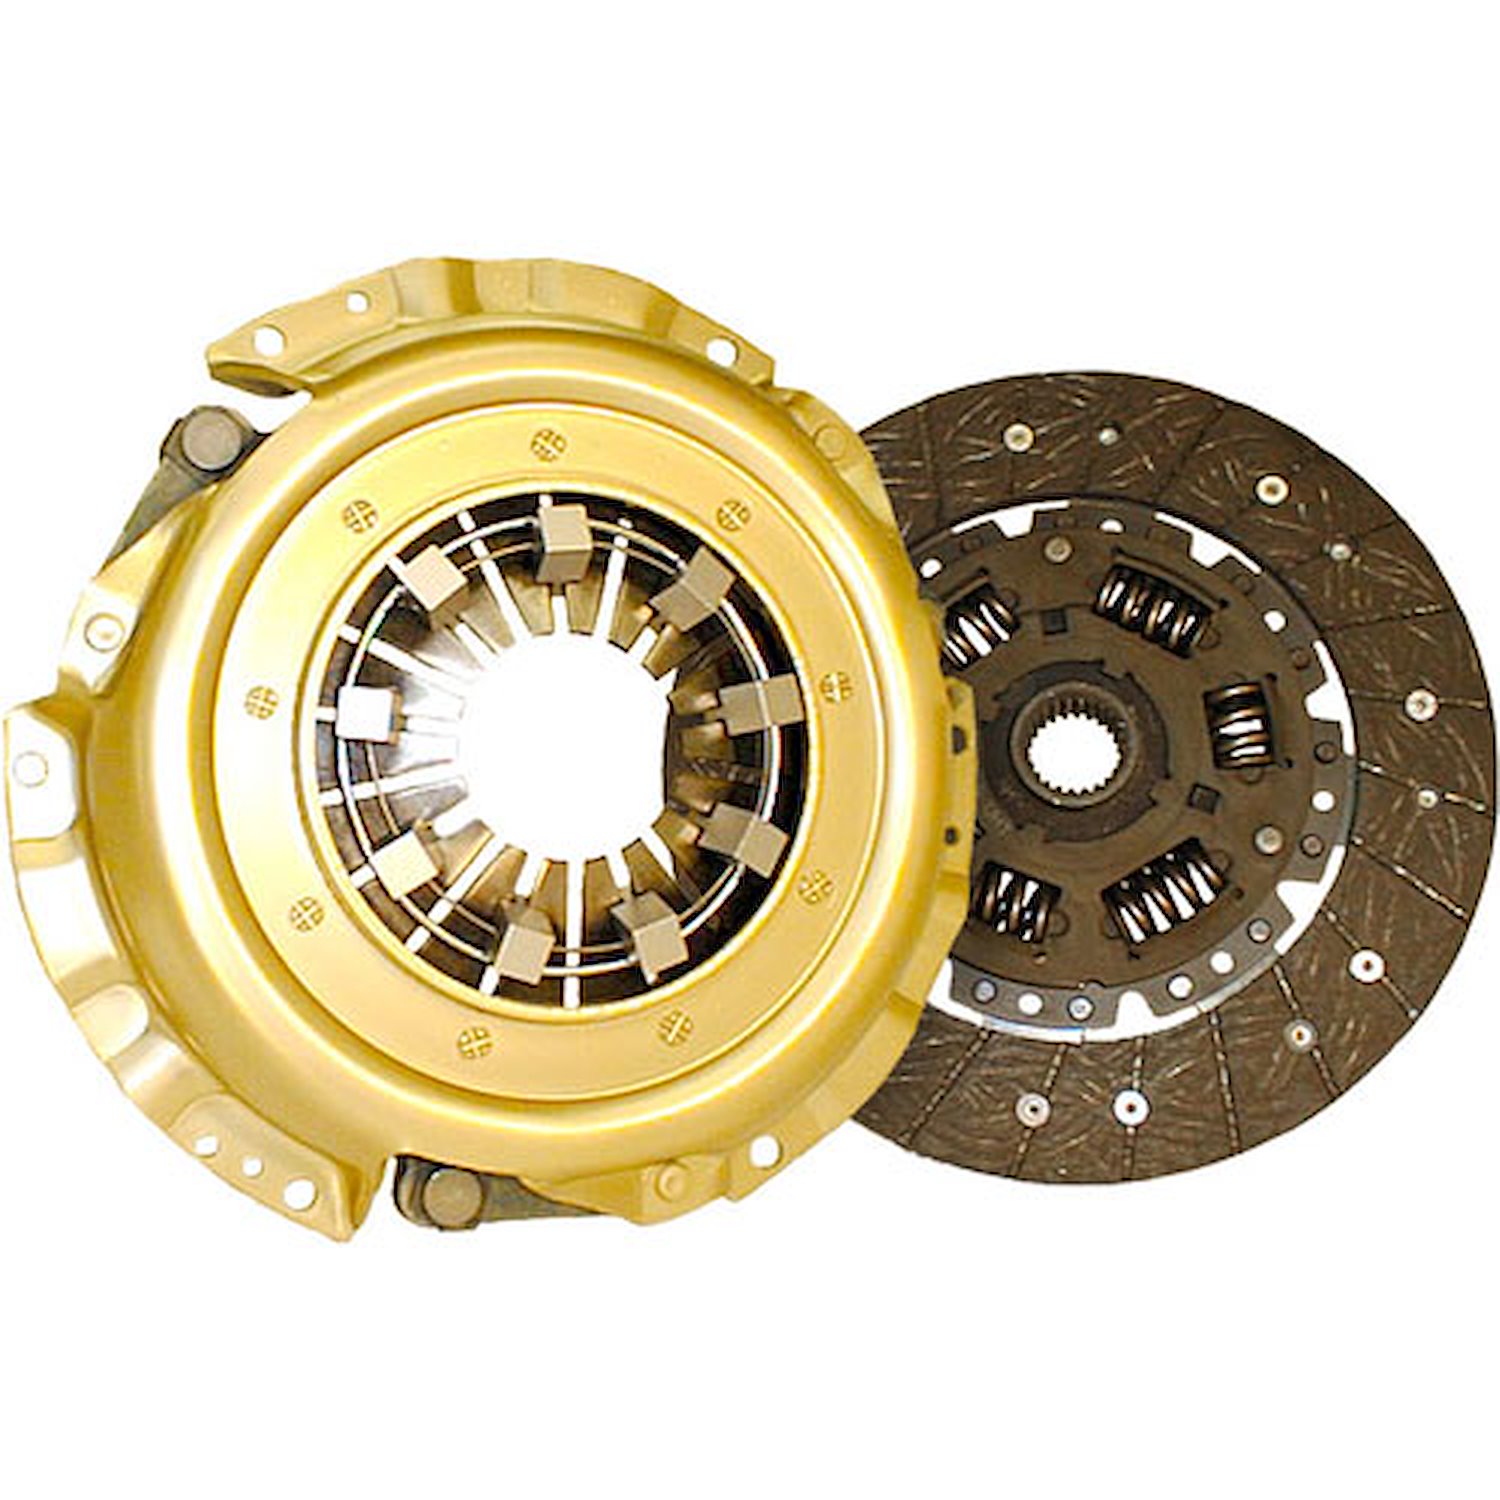 Centerforce I Clutch Kit Includes Pressure Plate and Disc